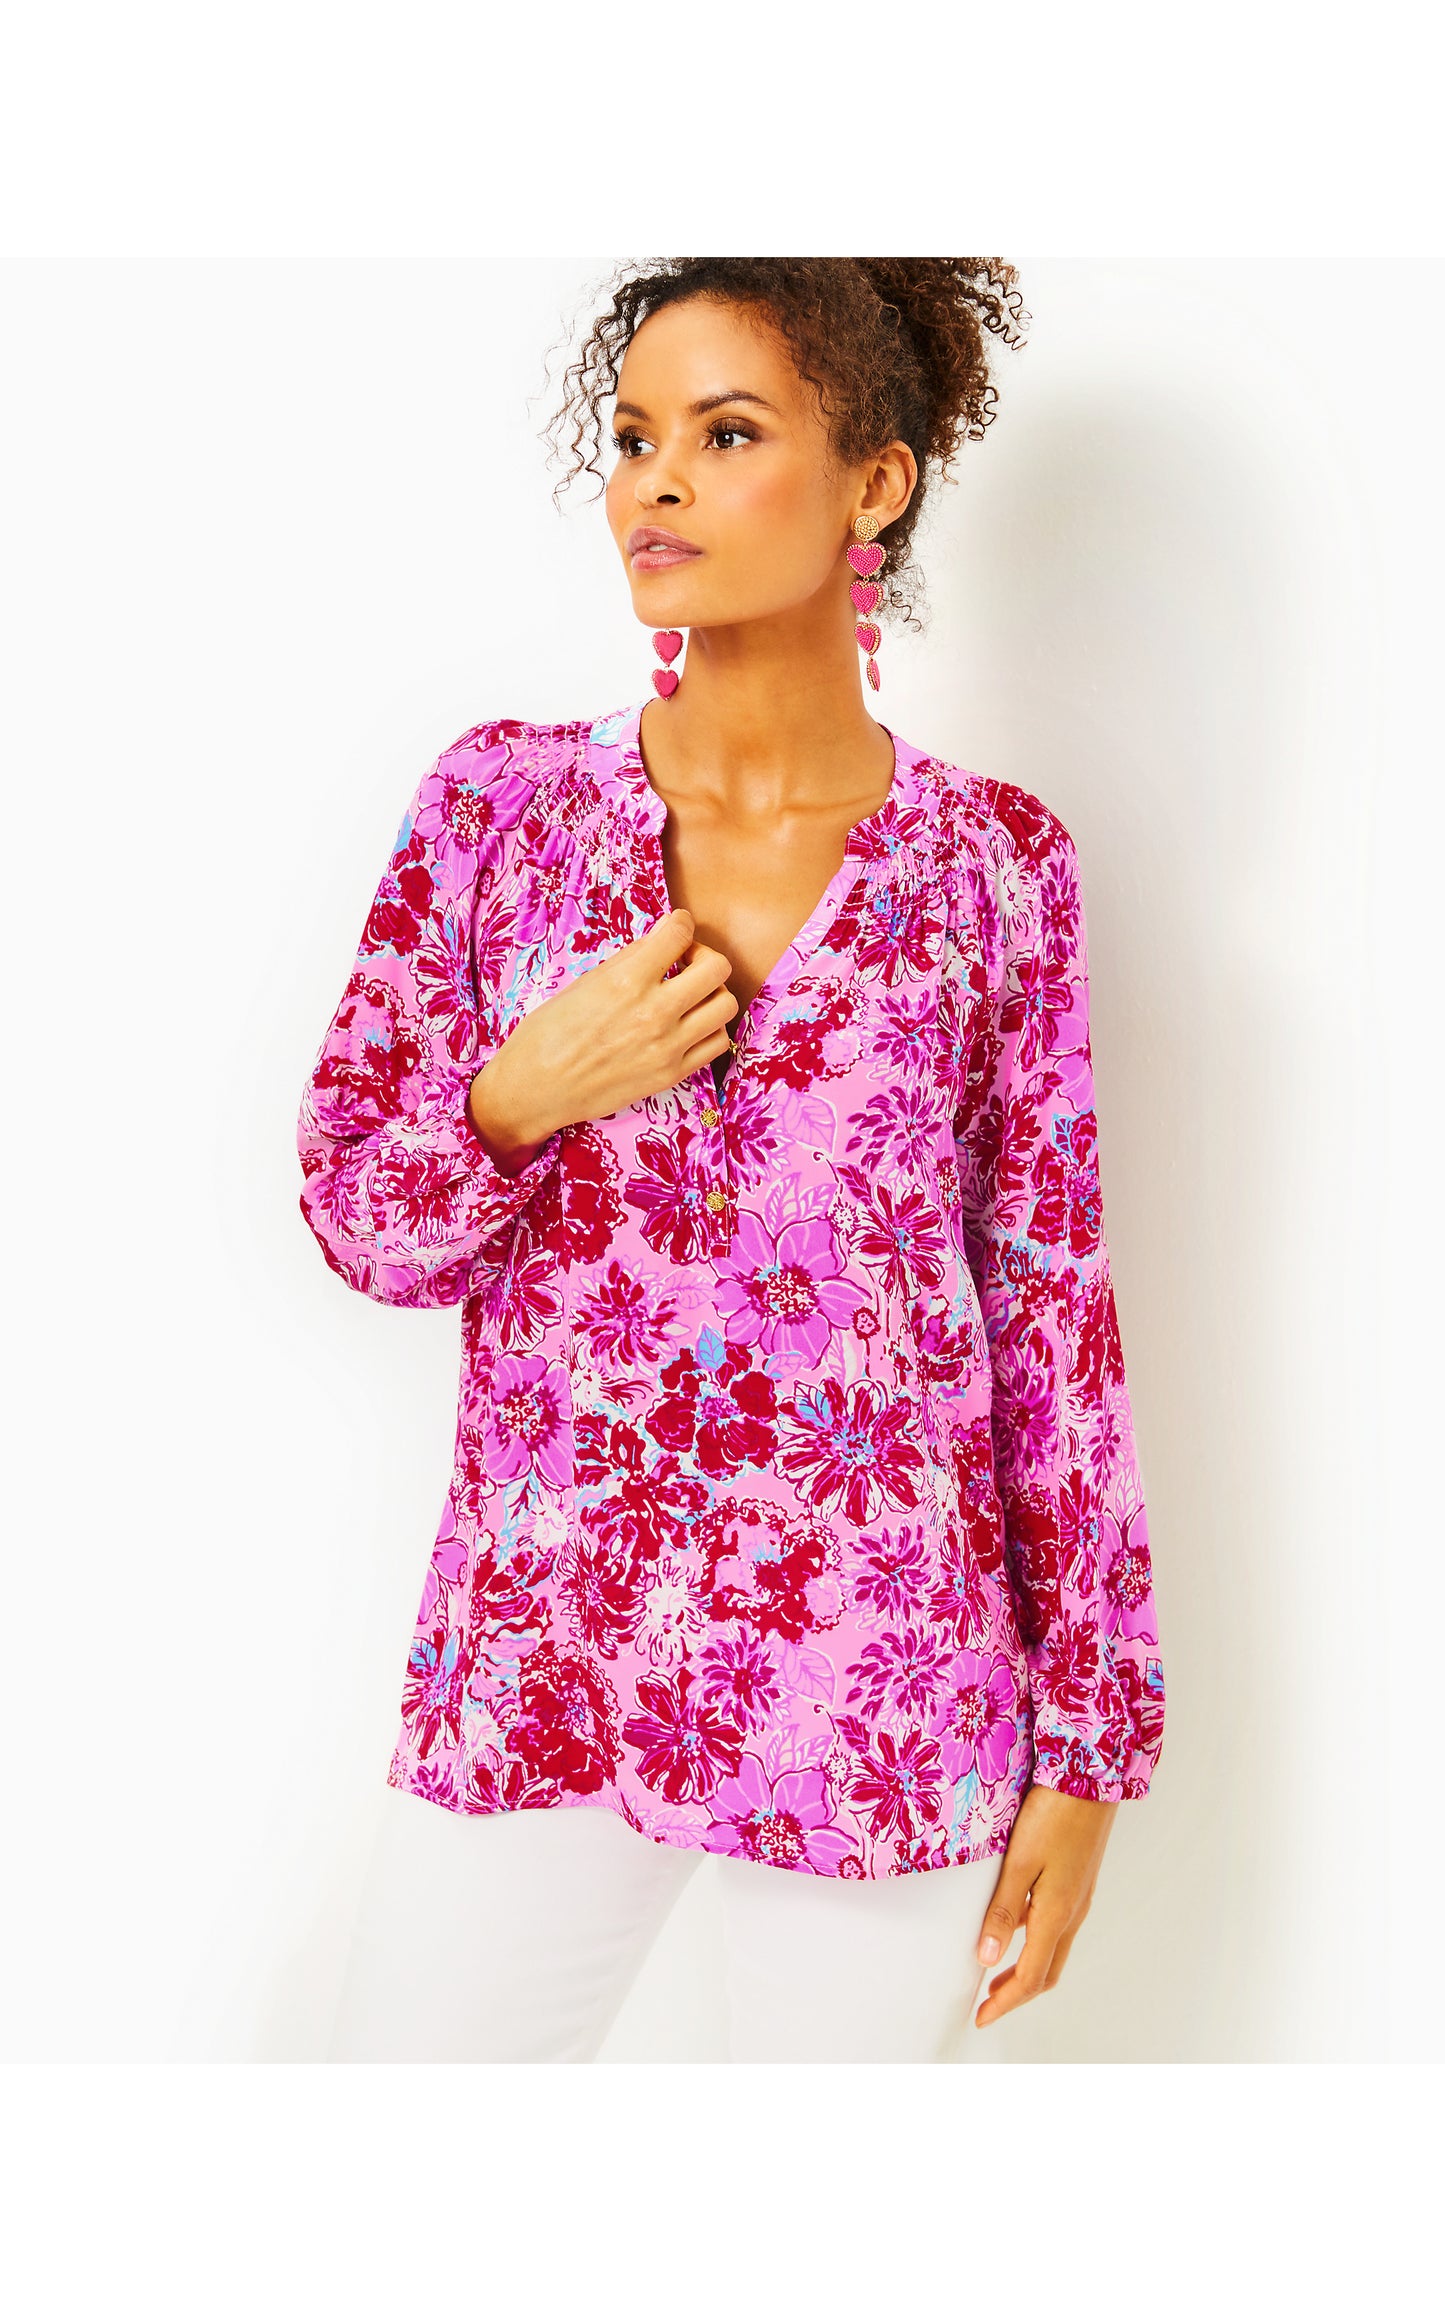 Elsa Top in Lilac Thistle In The Wild Flowers